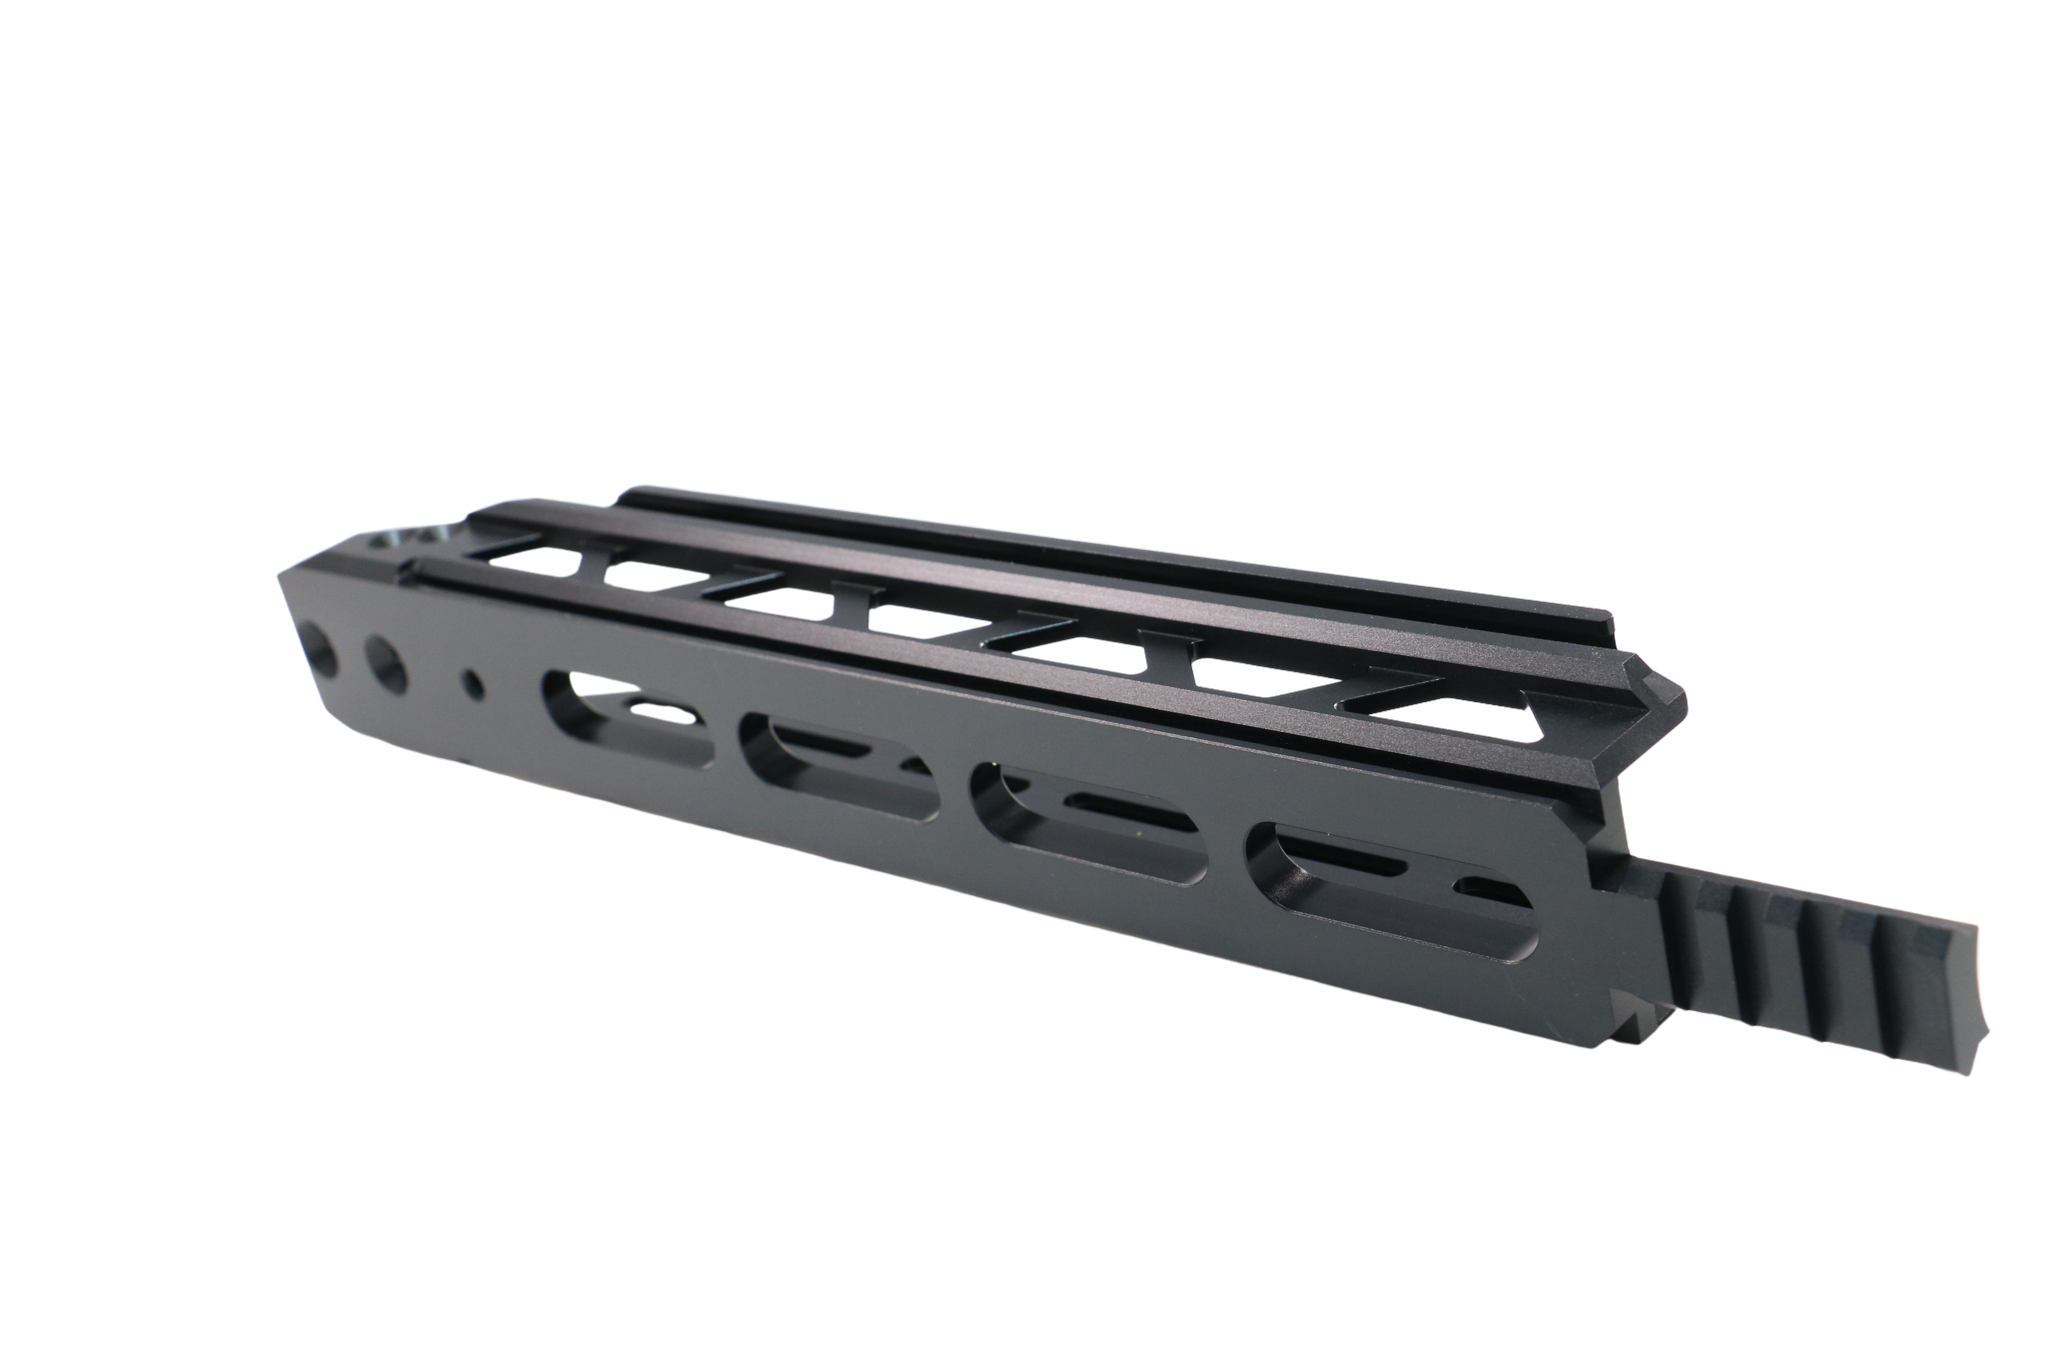 Saber Tactical Dreamline Tube Chassis